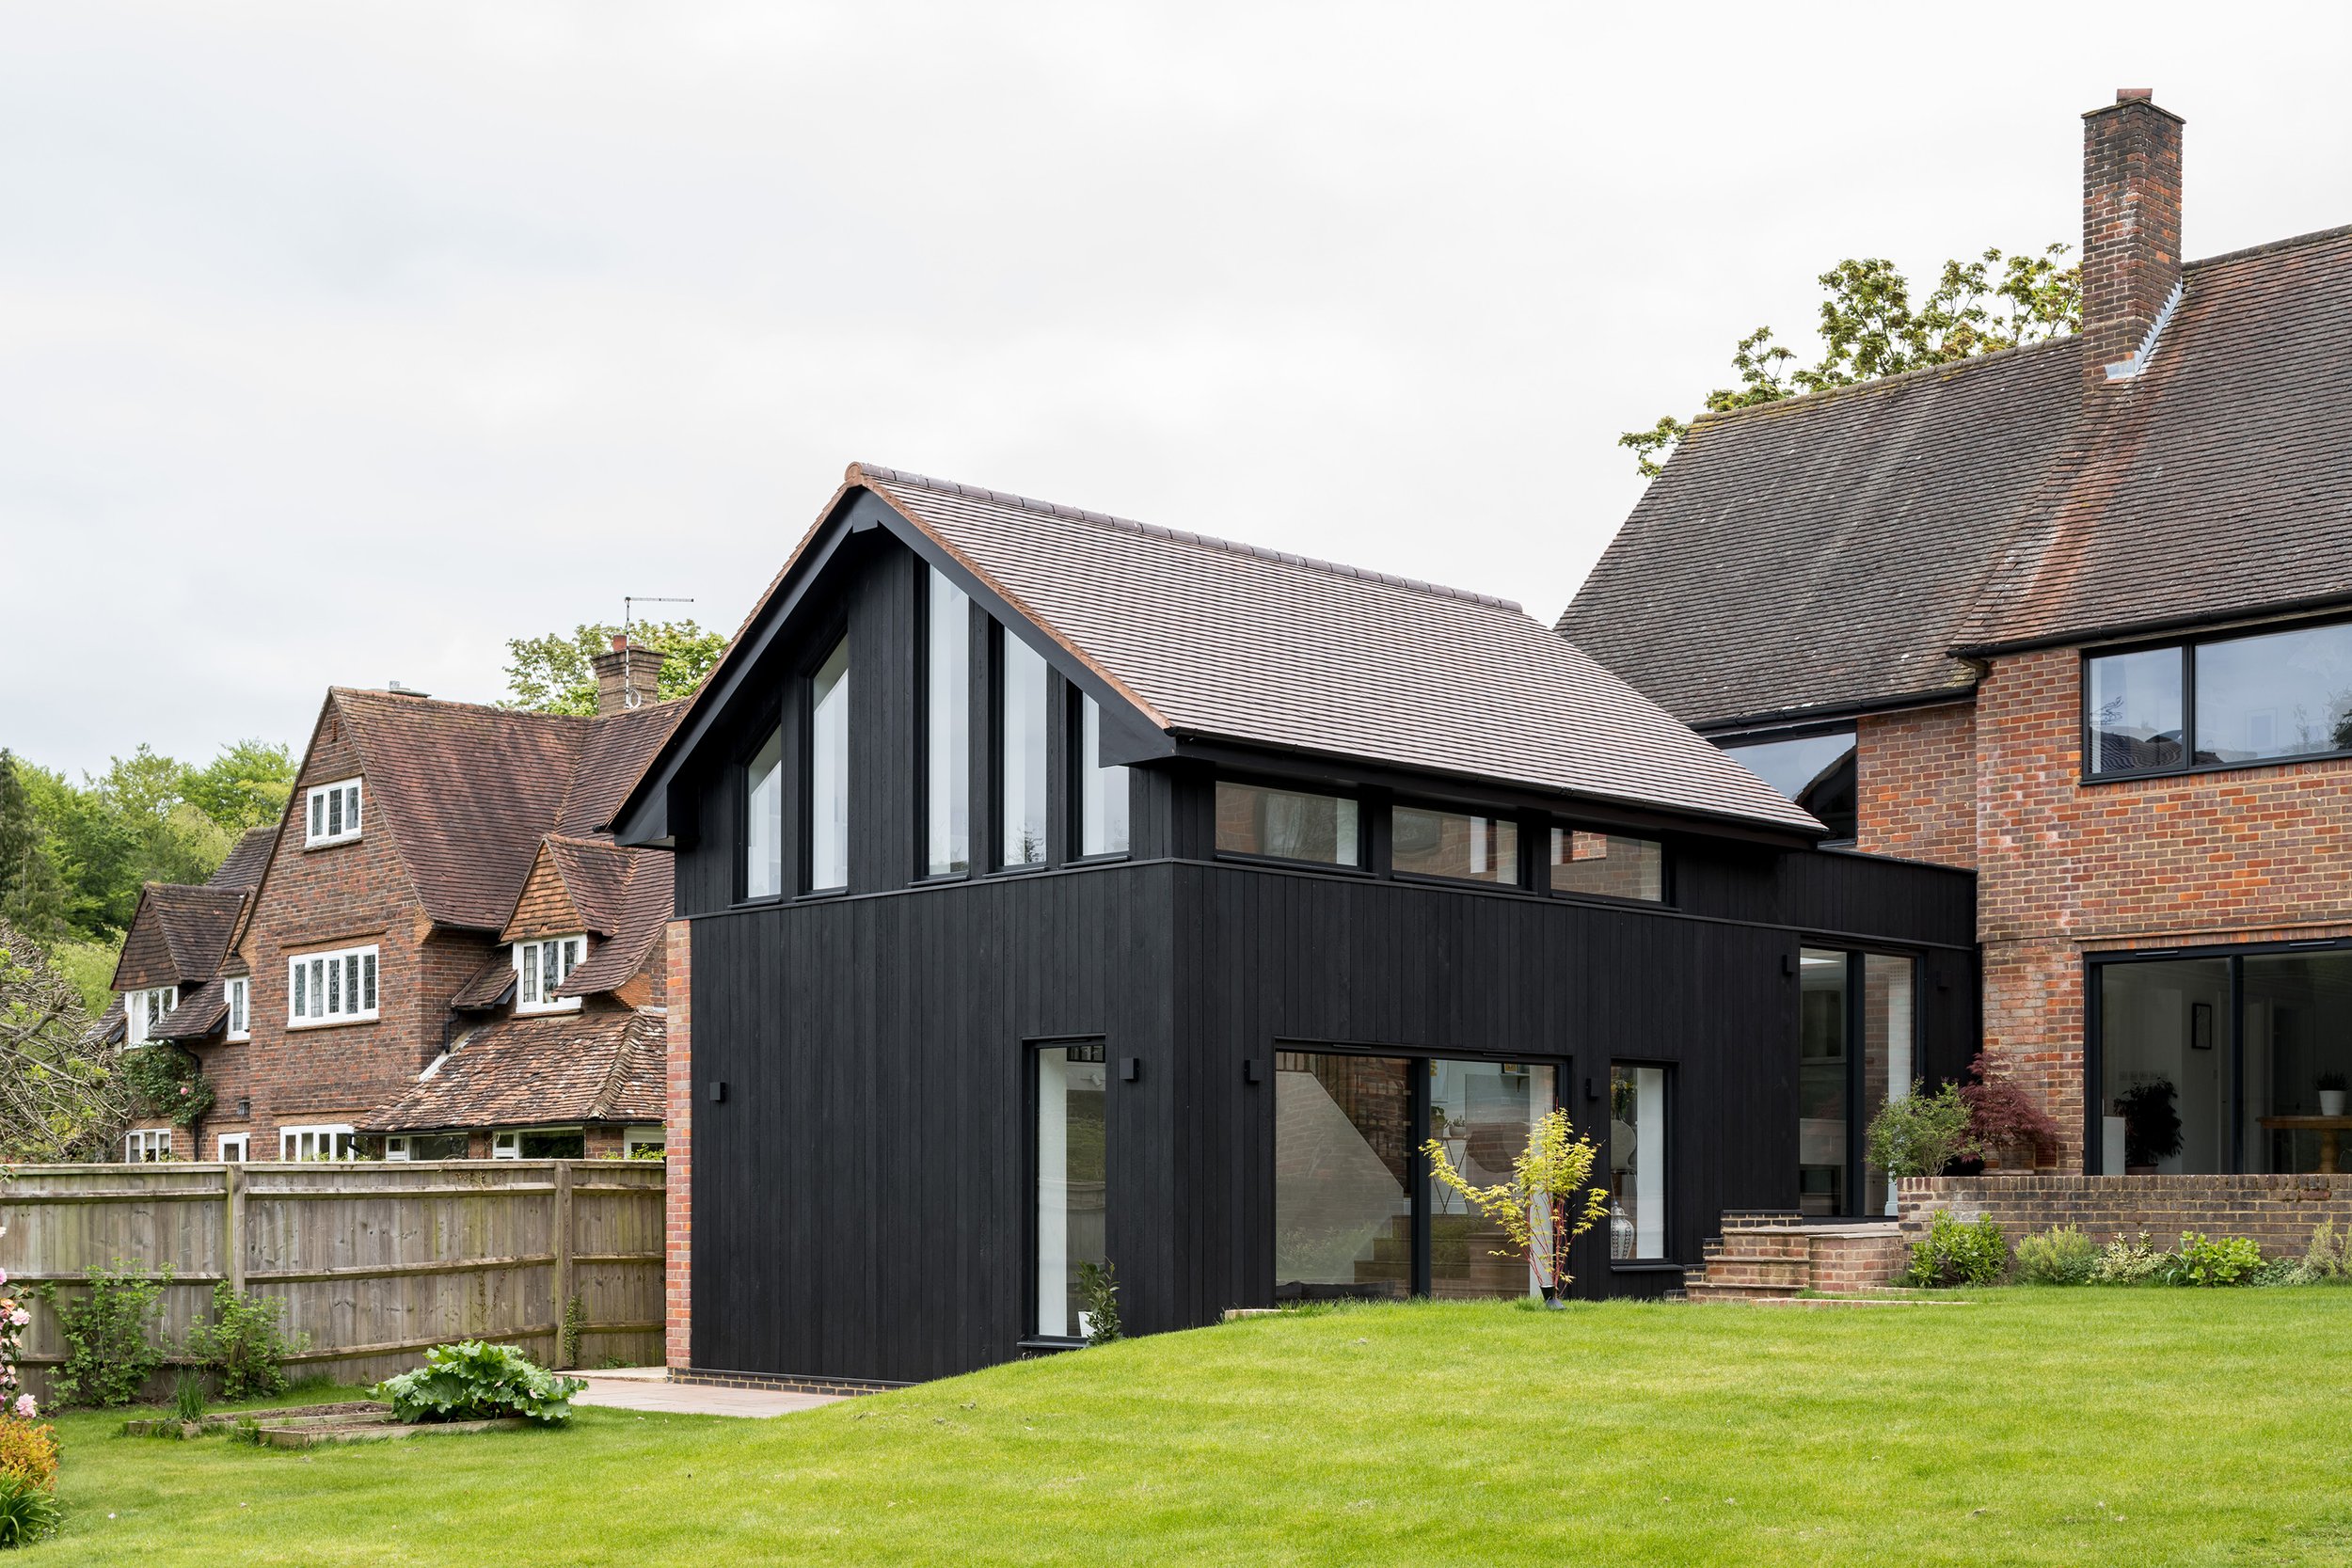 14-The-Pippins-Charred-Timber-House-Extension-Exterior-Architecture-London-Buckinghamshire-UK-Rider-Stirland-Architects.JPG